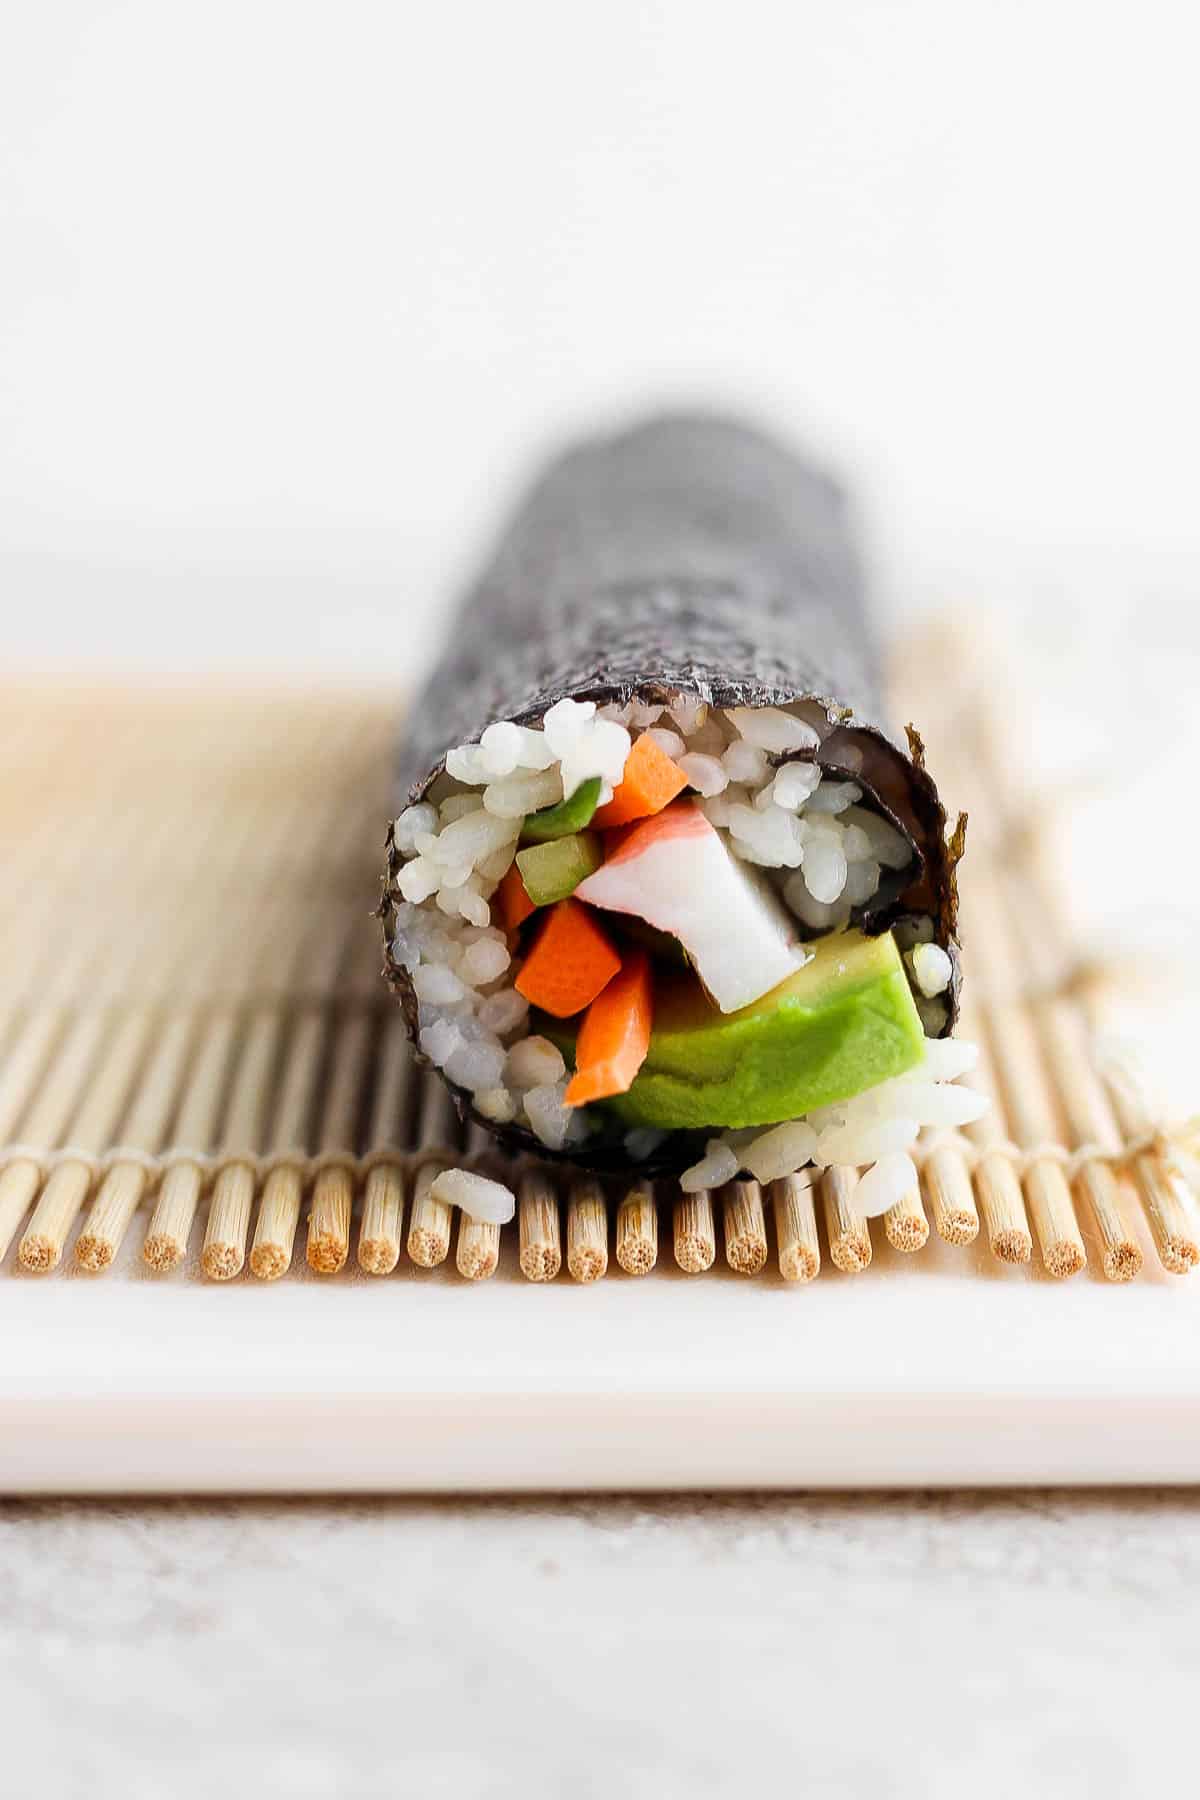 A perfectly wrapped California roll.